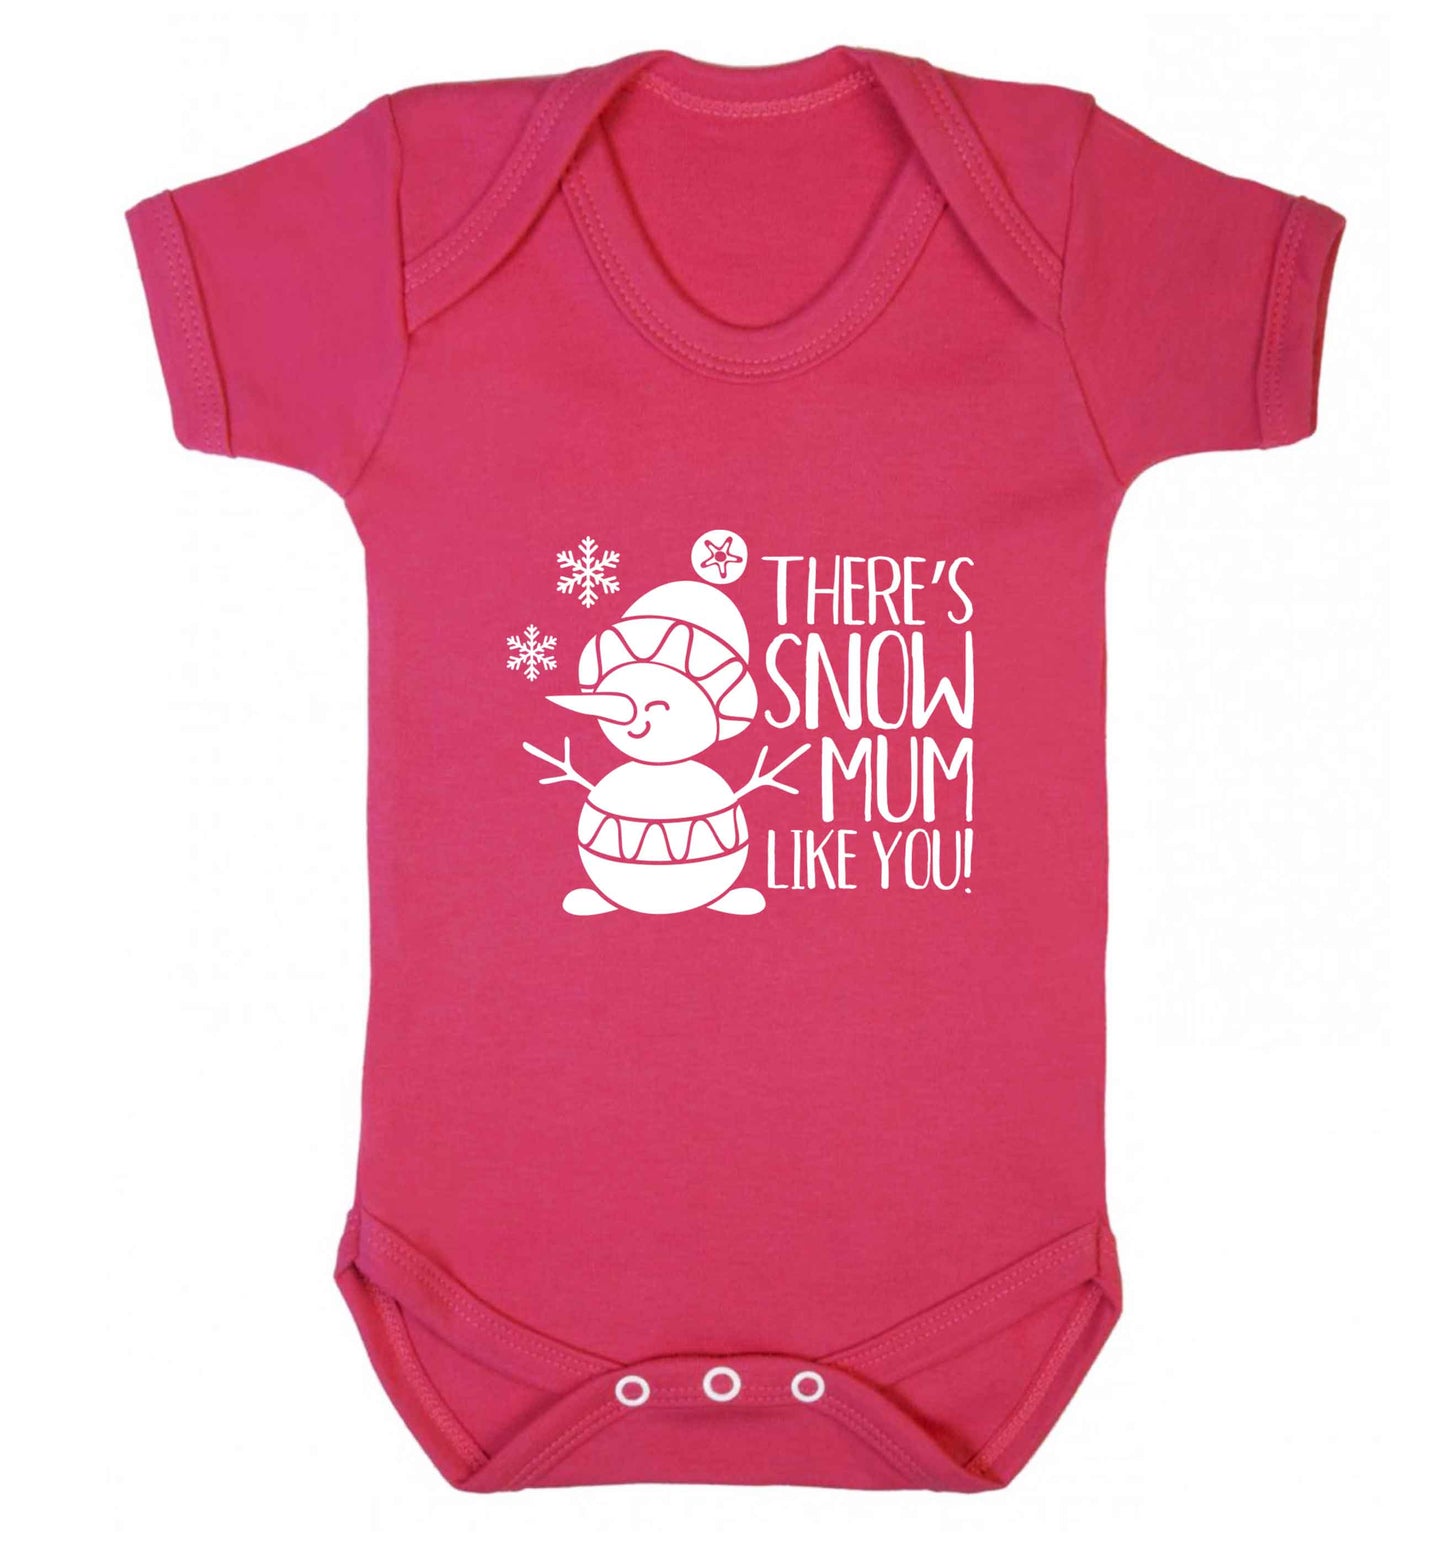 There's snow mum like you baby vest dark pink 18-24 months